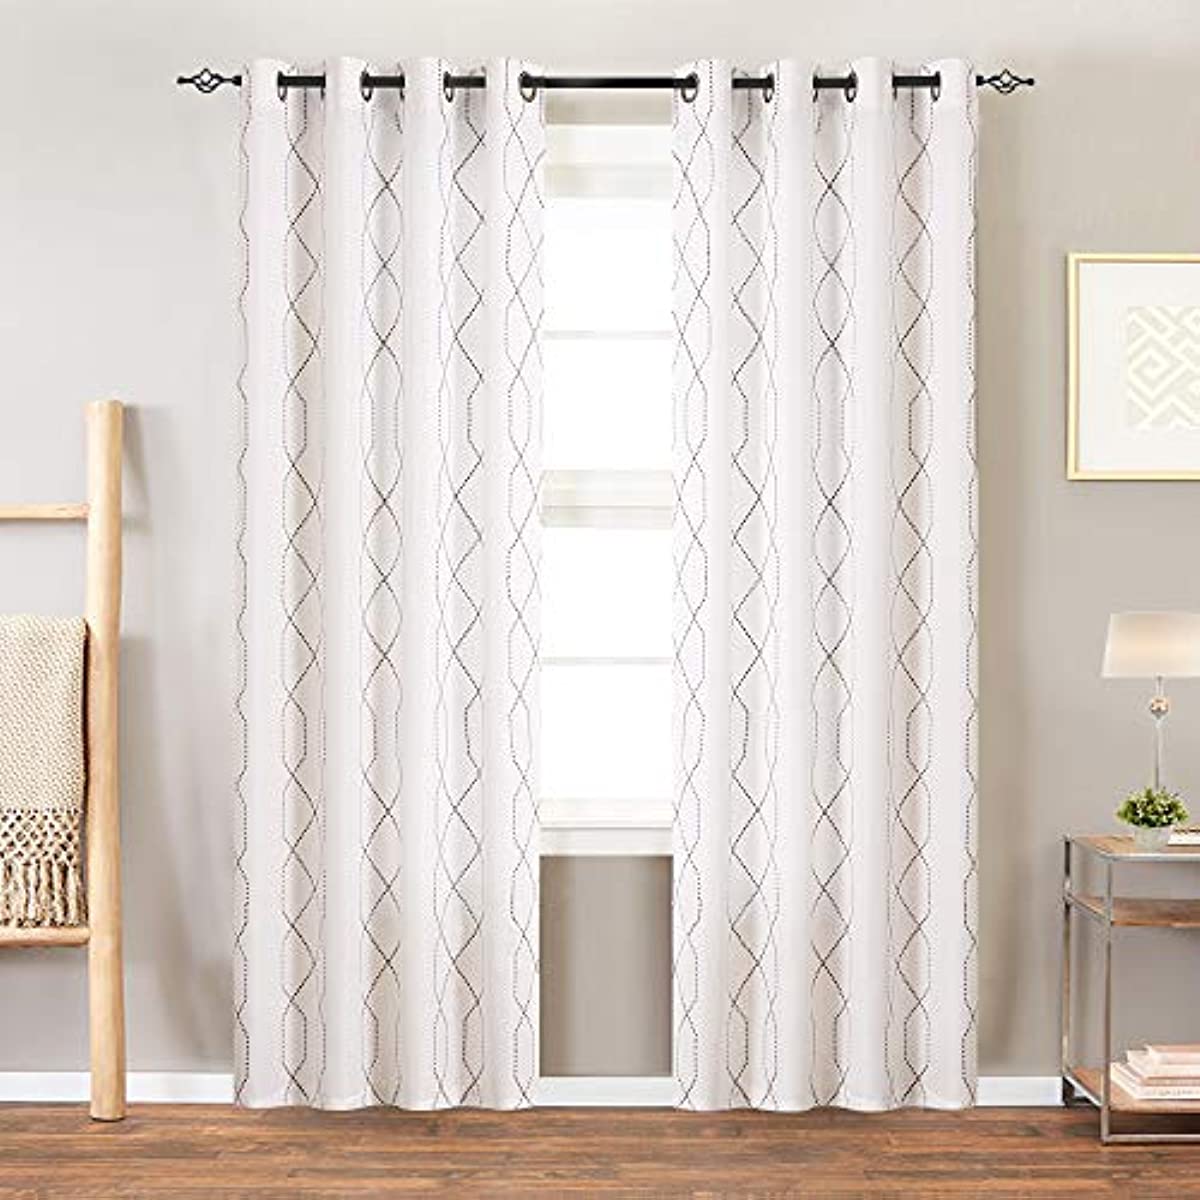  Geometric Curtains White Cotton Linen Textured Curtain for  Living Room Darkening 108 Inch Long Bedroom Curtain Modern Curtains Black  Jacquard Semi Blackout Window Curtain 1 Panel , Grommet Curtains : Home &  Kitchen